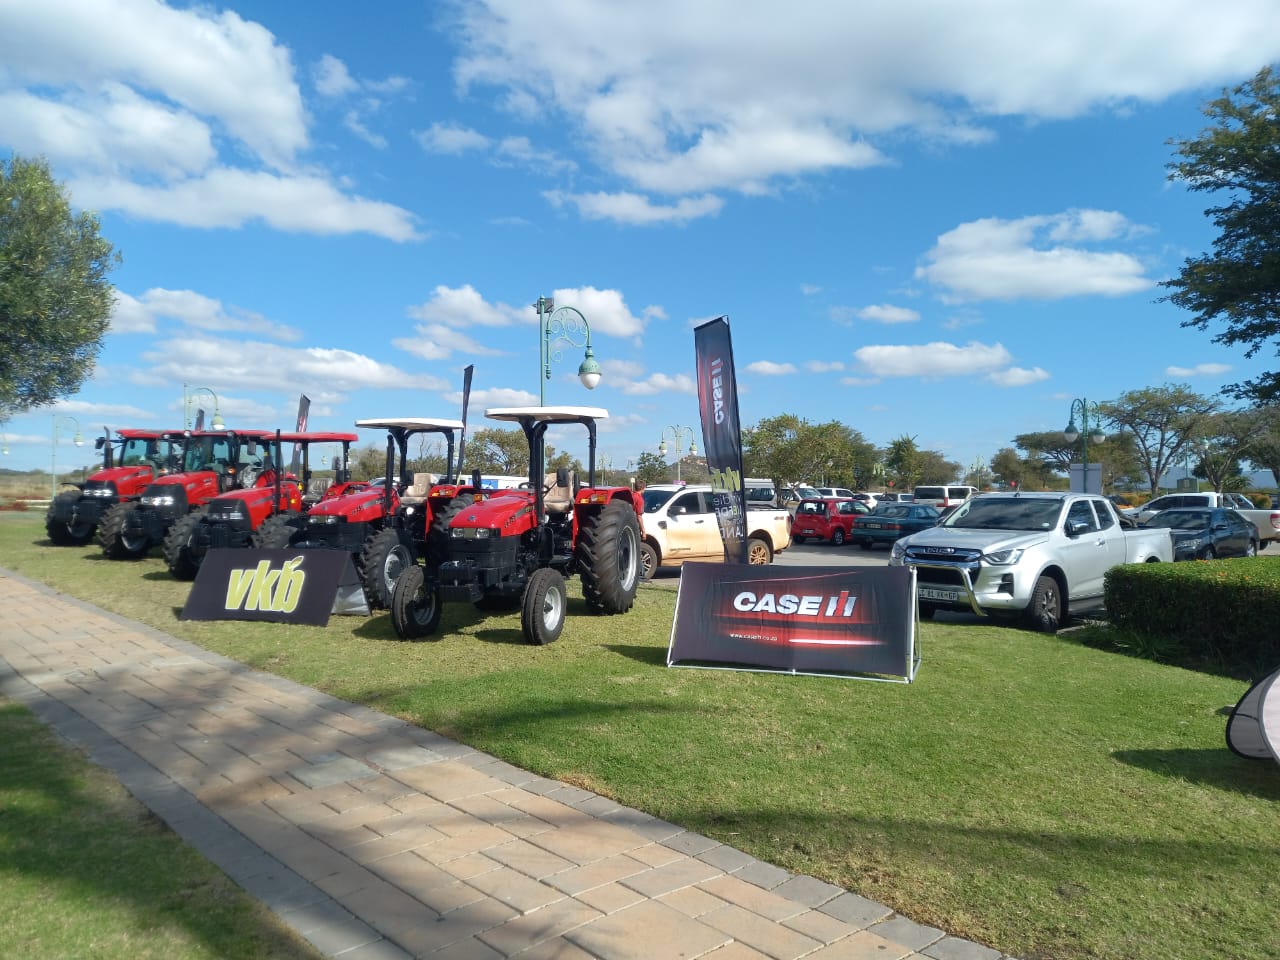 Display of Case tractors at Meropa Casino Polokwane